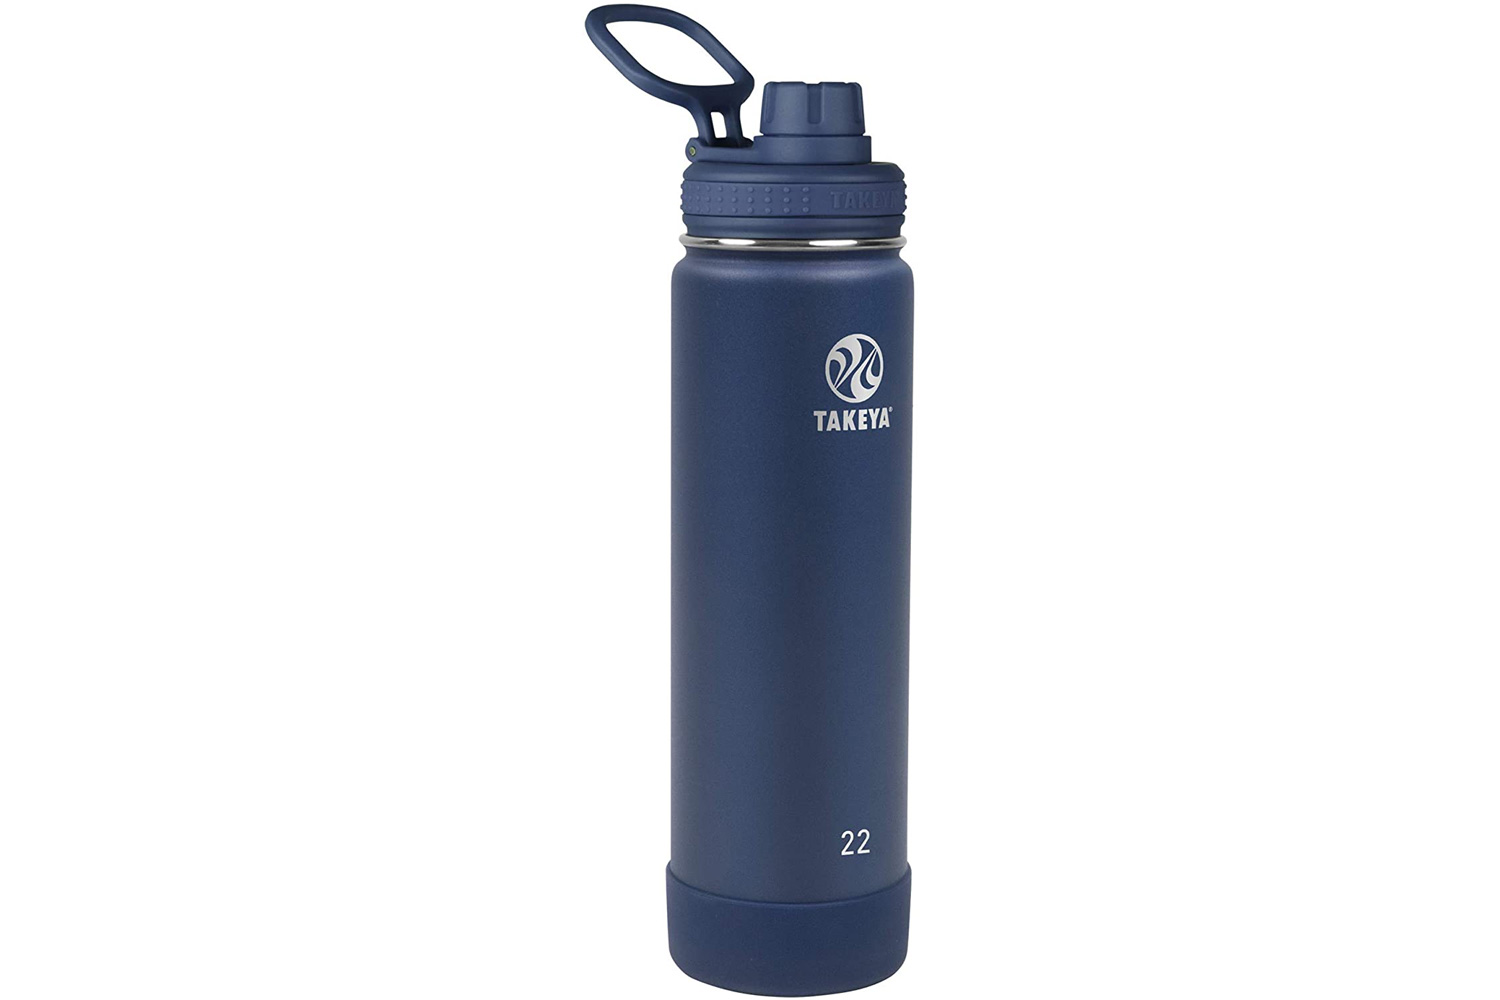 https://www.themanual.com/wp-content/uploads/sites/9/2021/09/takeya-actives-insulated-water-bottle.jpg?fit=800%2C800&p=1